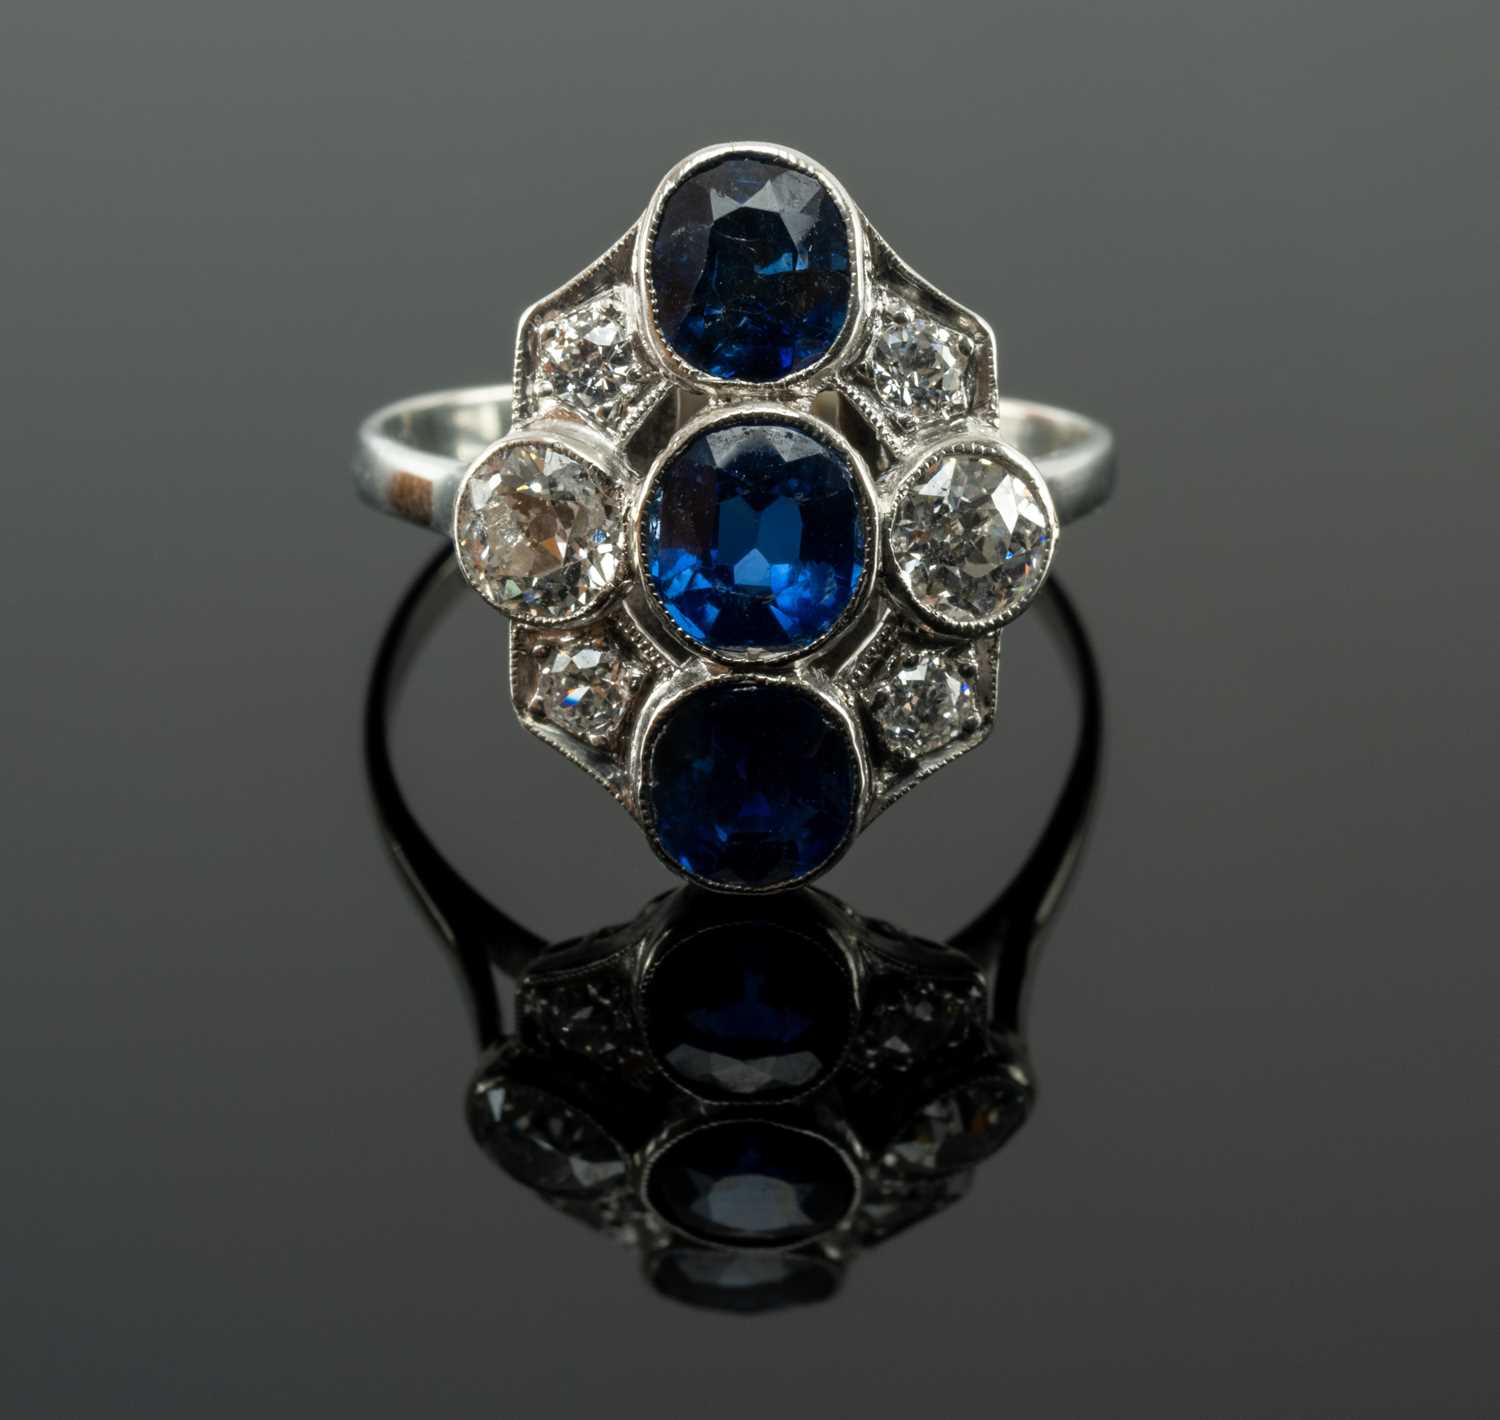 WHITE METAL SAPPHIRE & DIAMOND CLUSTER RING, the three vertical sapphires complimented by six old